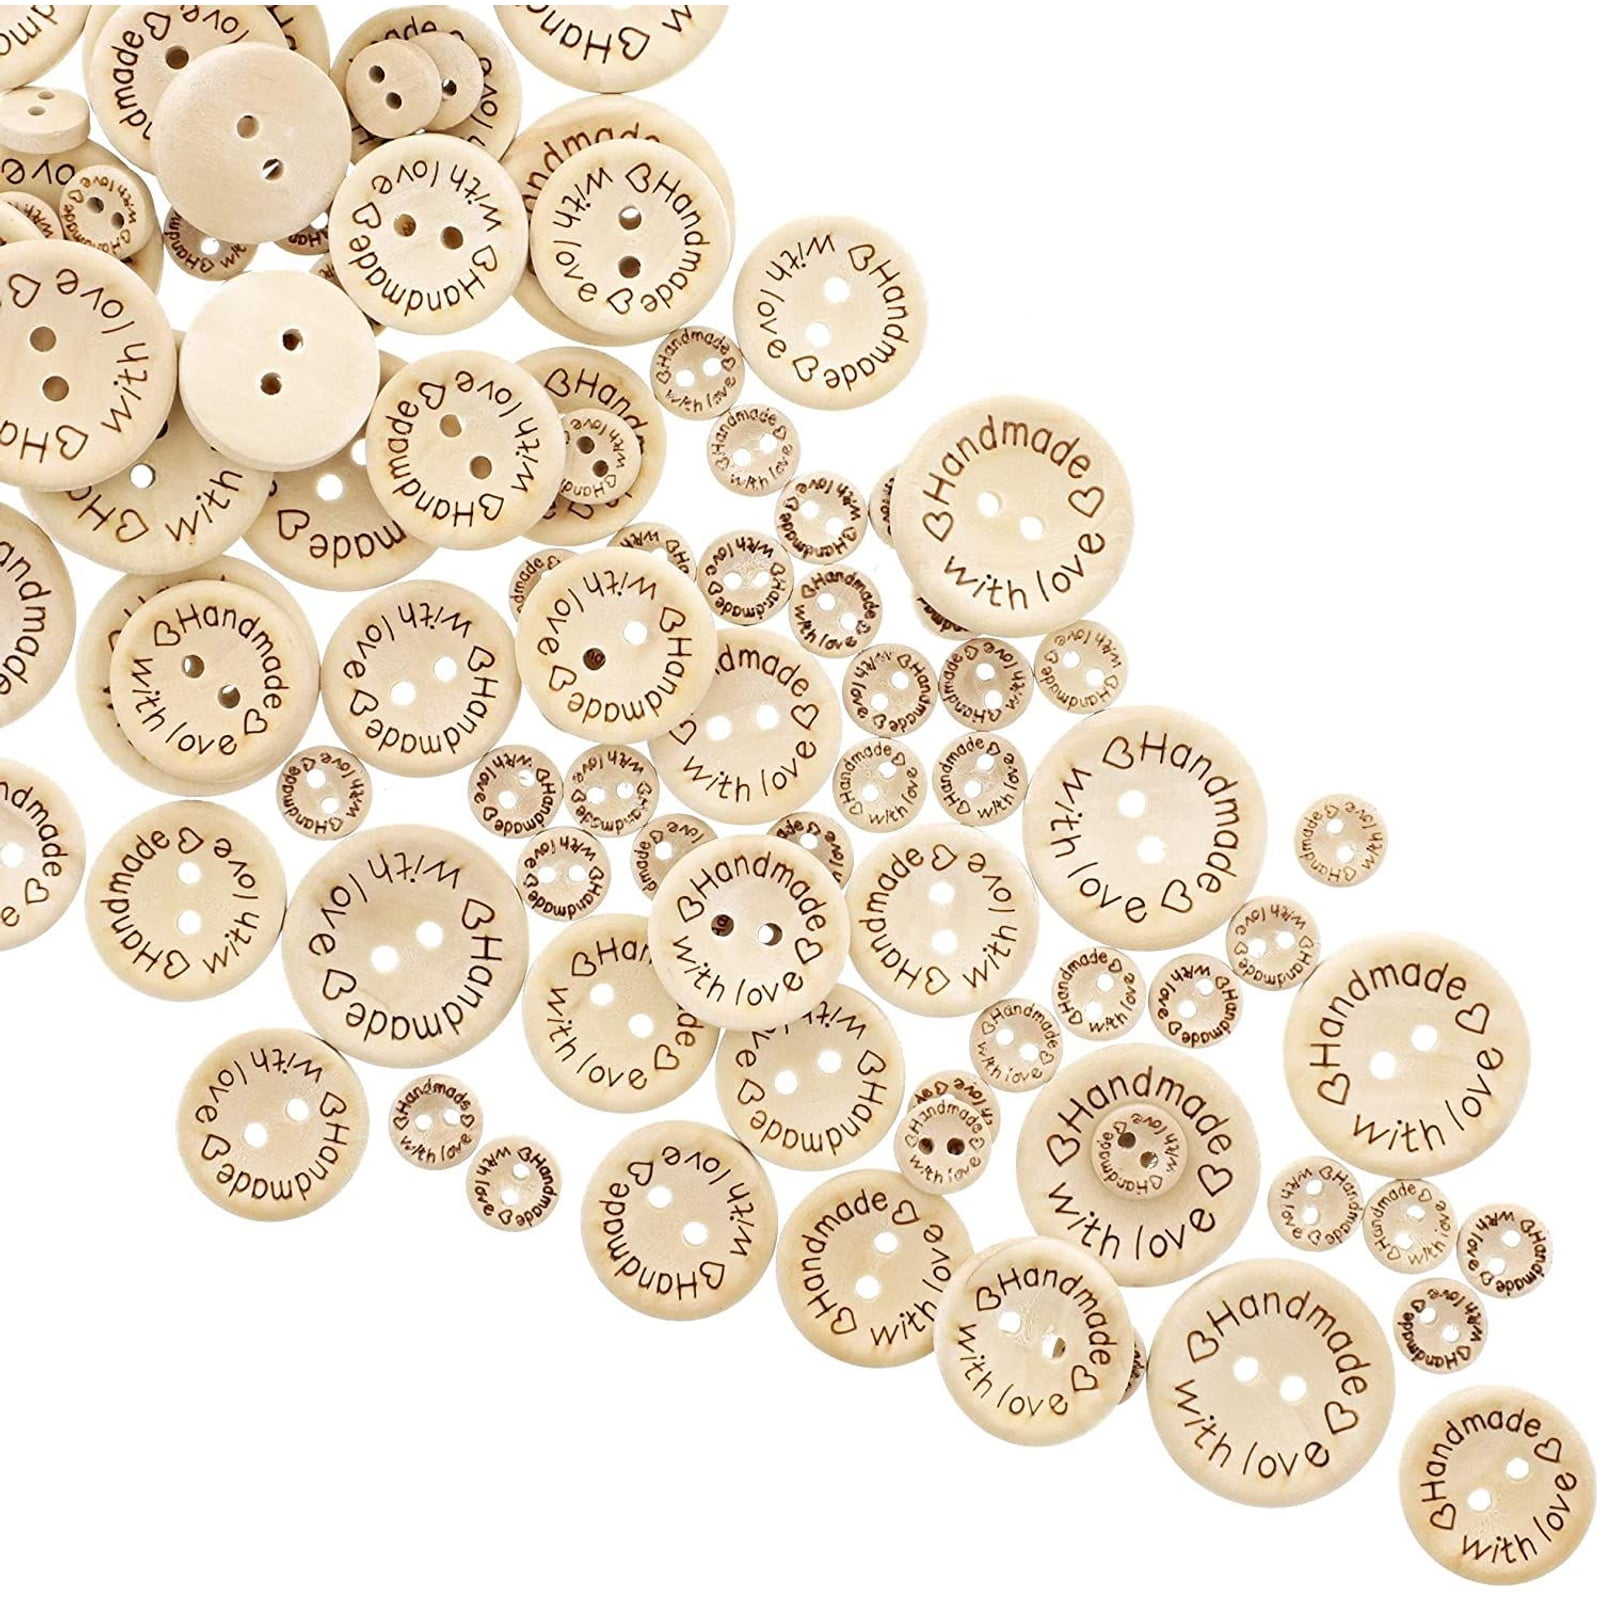 Wood Holes Wooden DIY Buttons 20/25mm Craft Pcs Scrapbooking 100 Round Sewing 2 